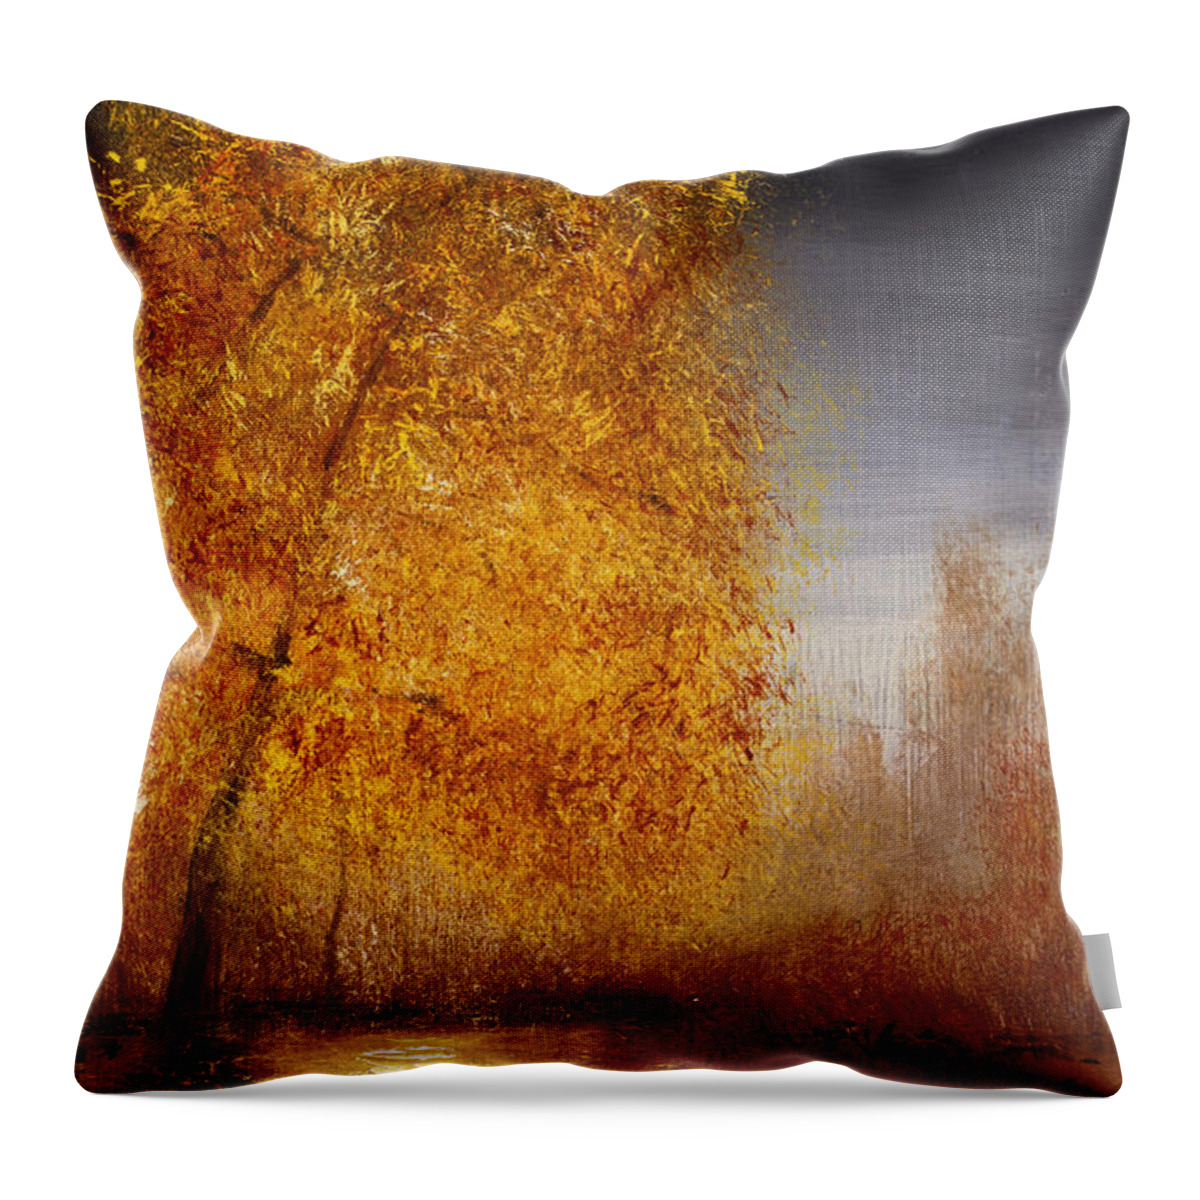 Gray Artus Throw Pillow featuring the painting Fall Lake Reflections by Gray Artus